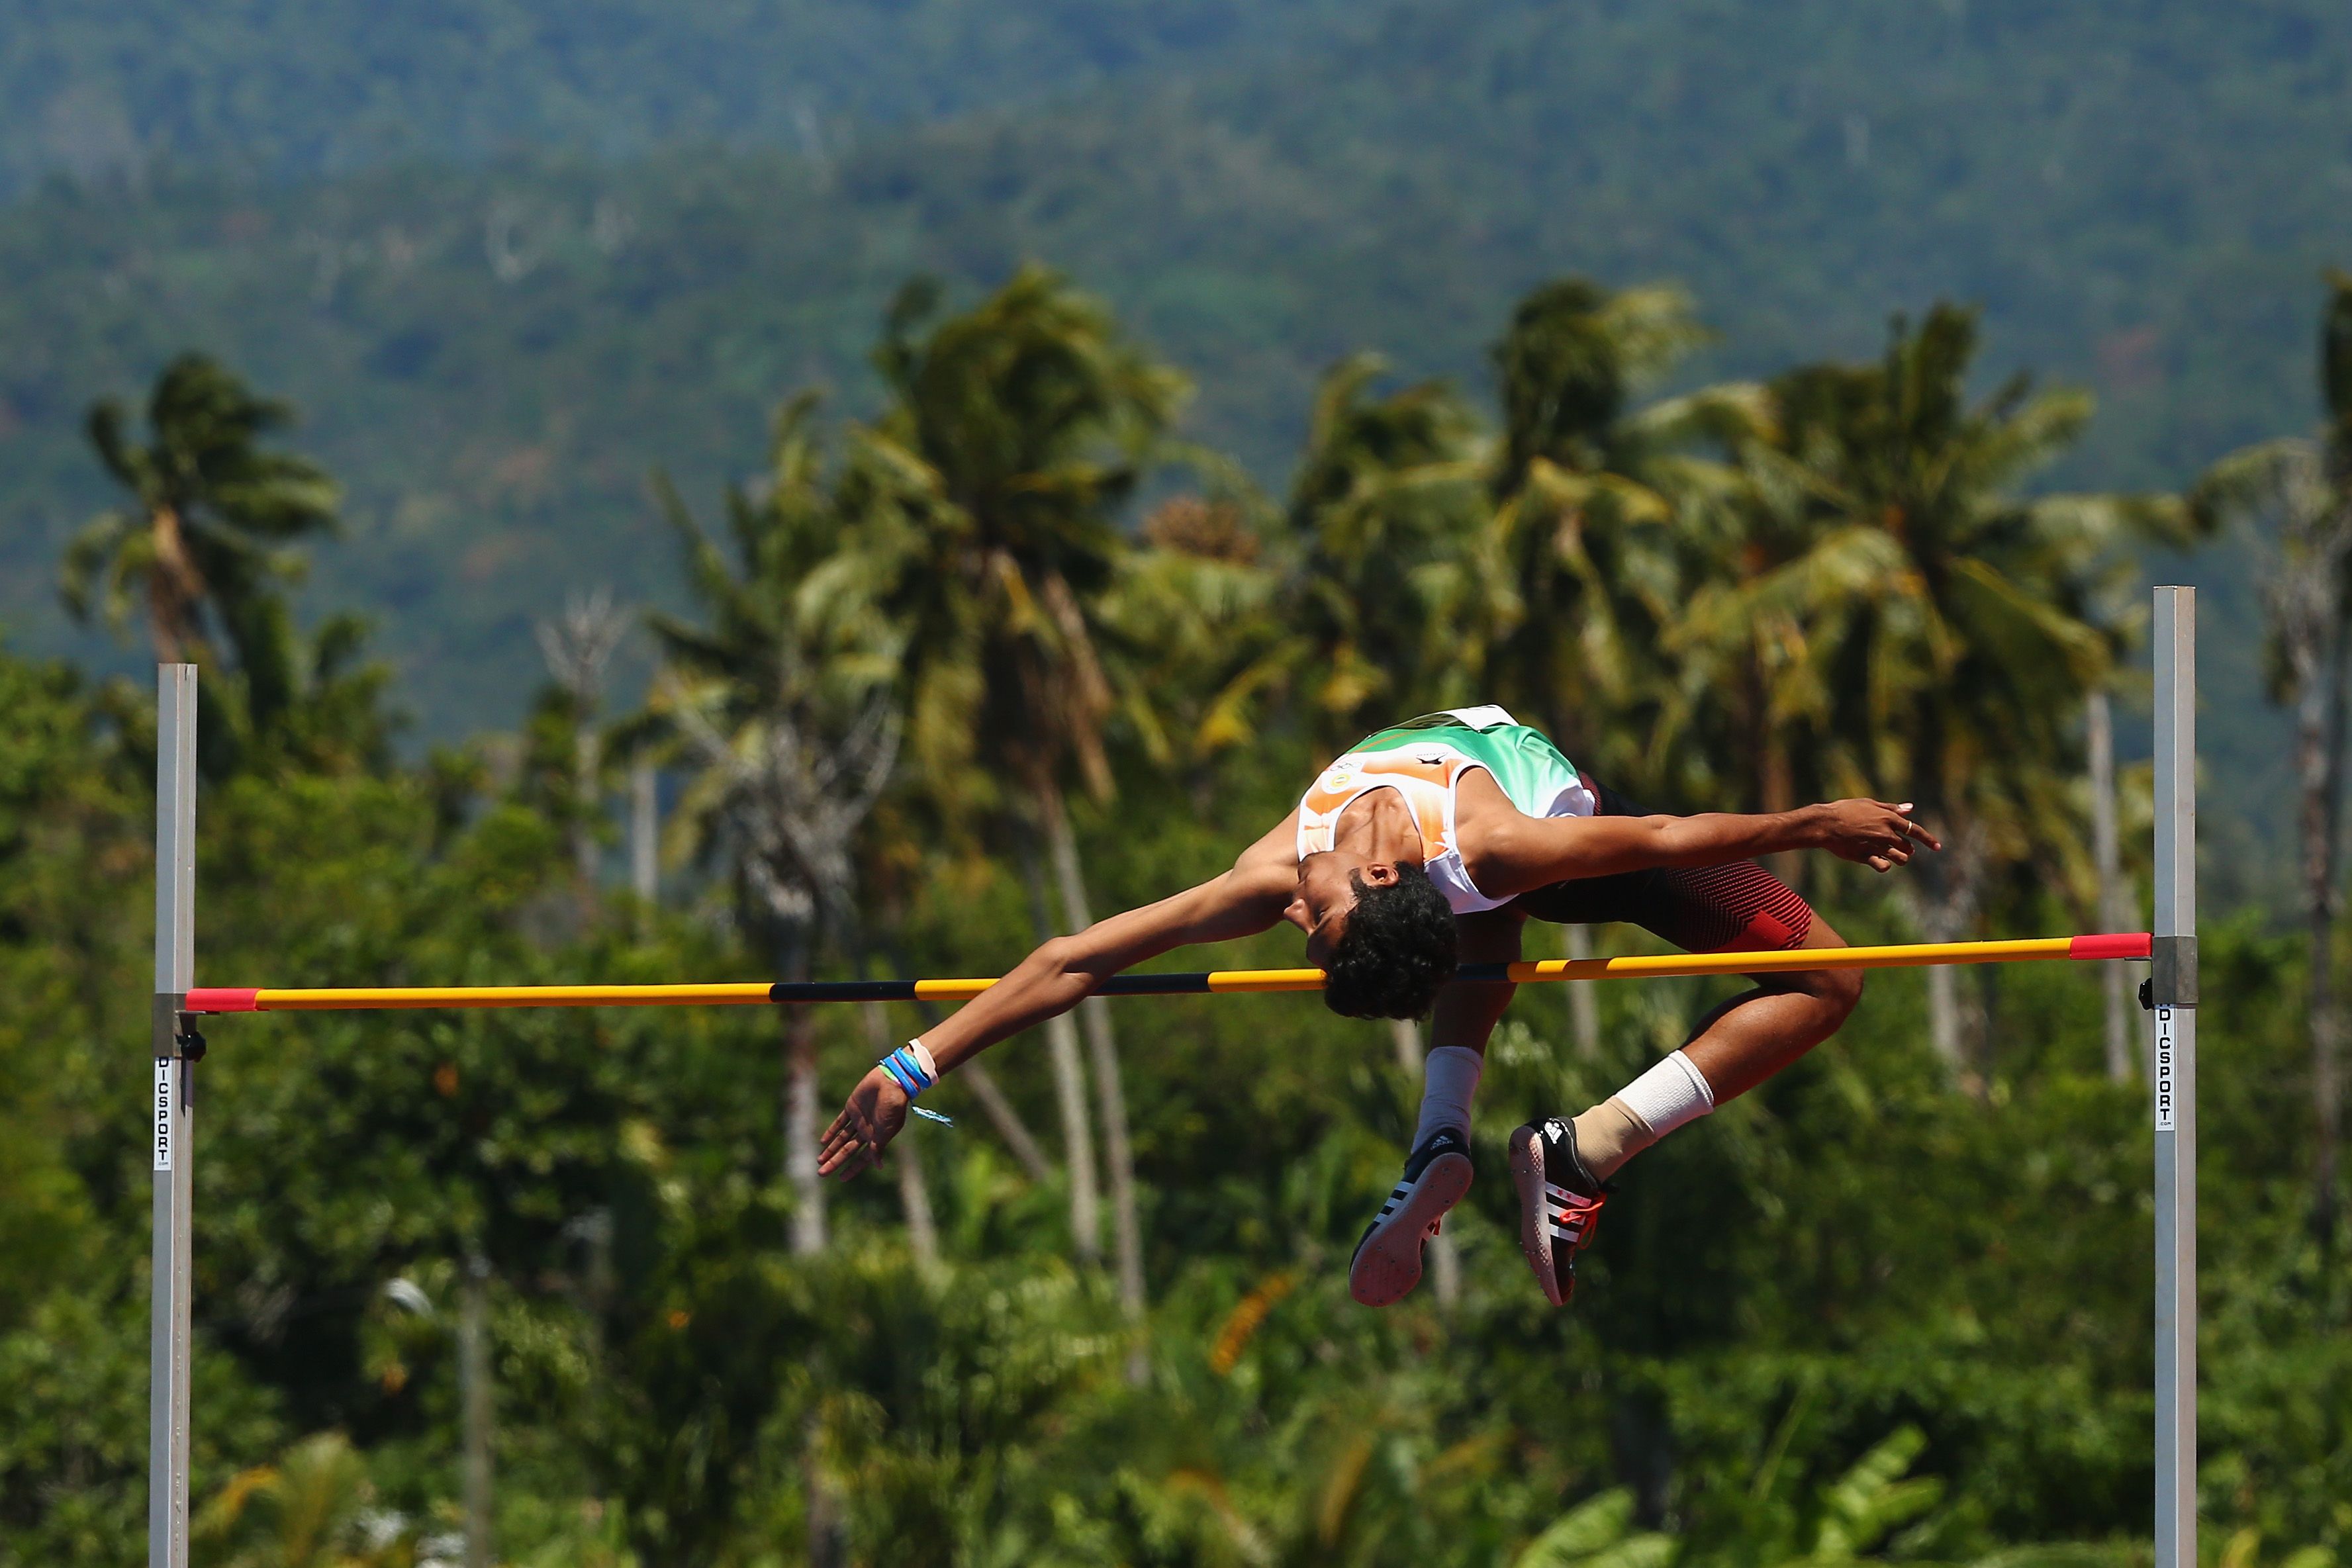 Tejaswin Shankar in action at the 2015 Commonwealth Youth Games in Apia, Samoa